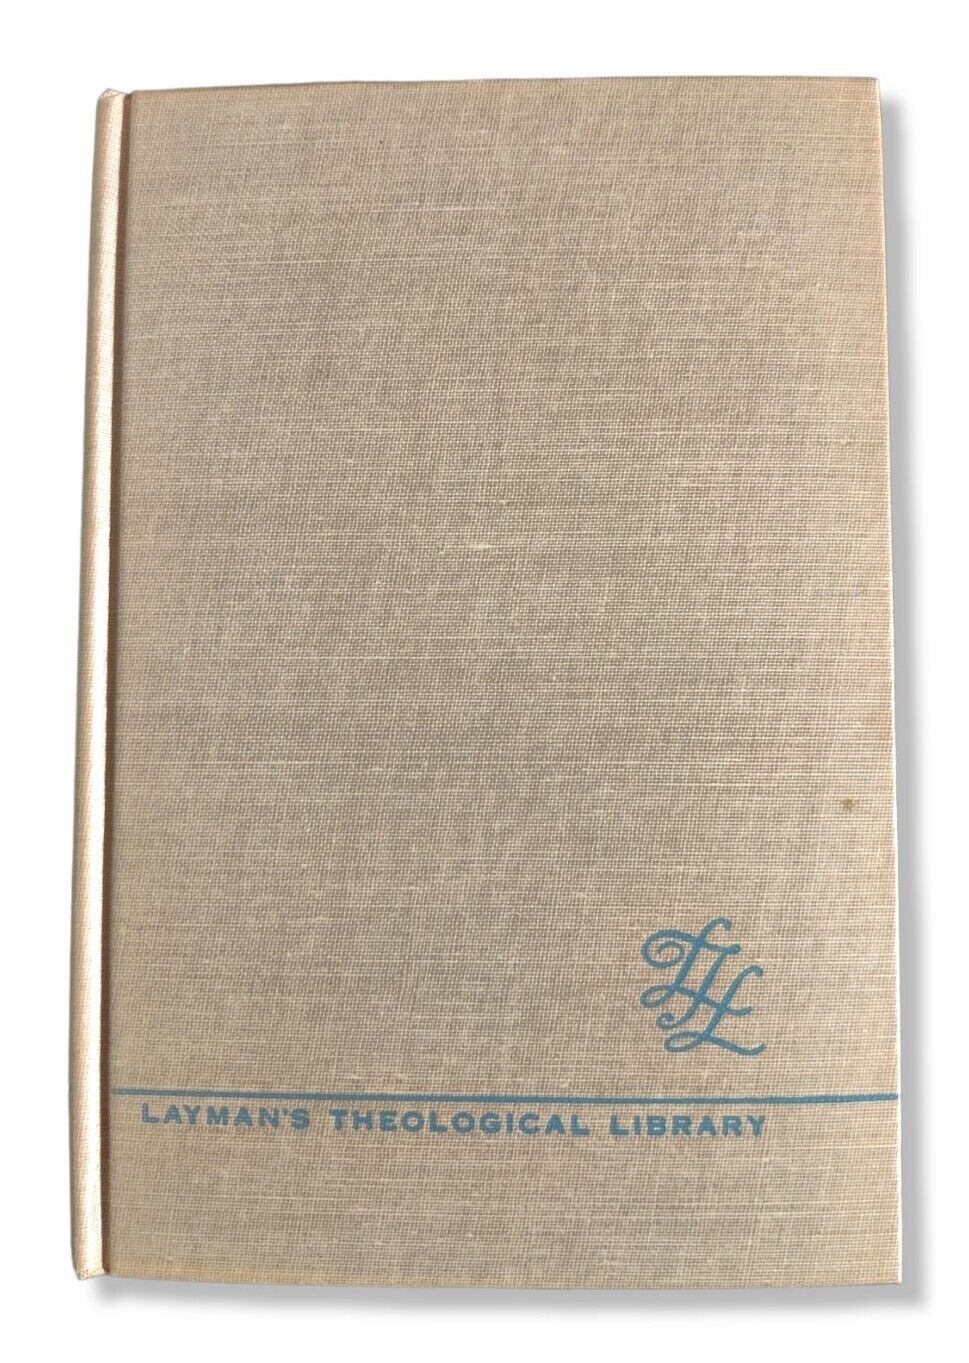 Layman\'s Theological Library Hardcover The Significance Of The Church 1956 